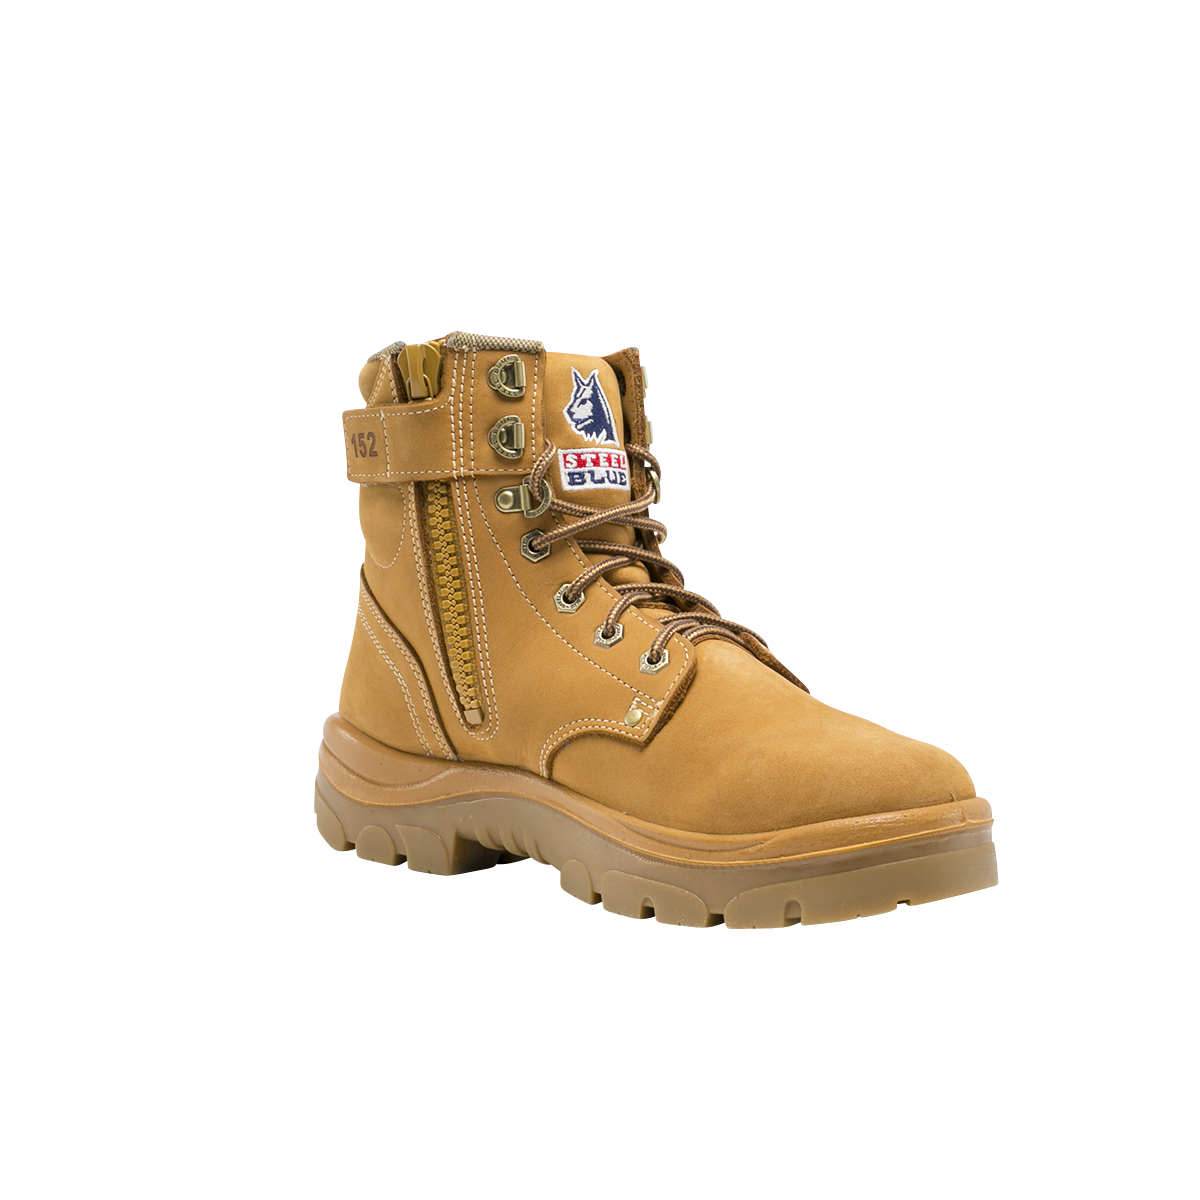 SAFETY BOOT ARGYLE LACE & ZIP S10 ANKLE WHEAT